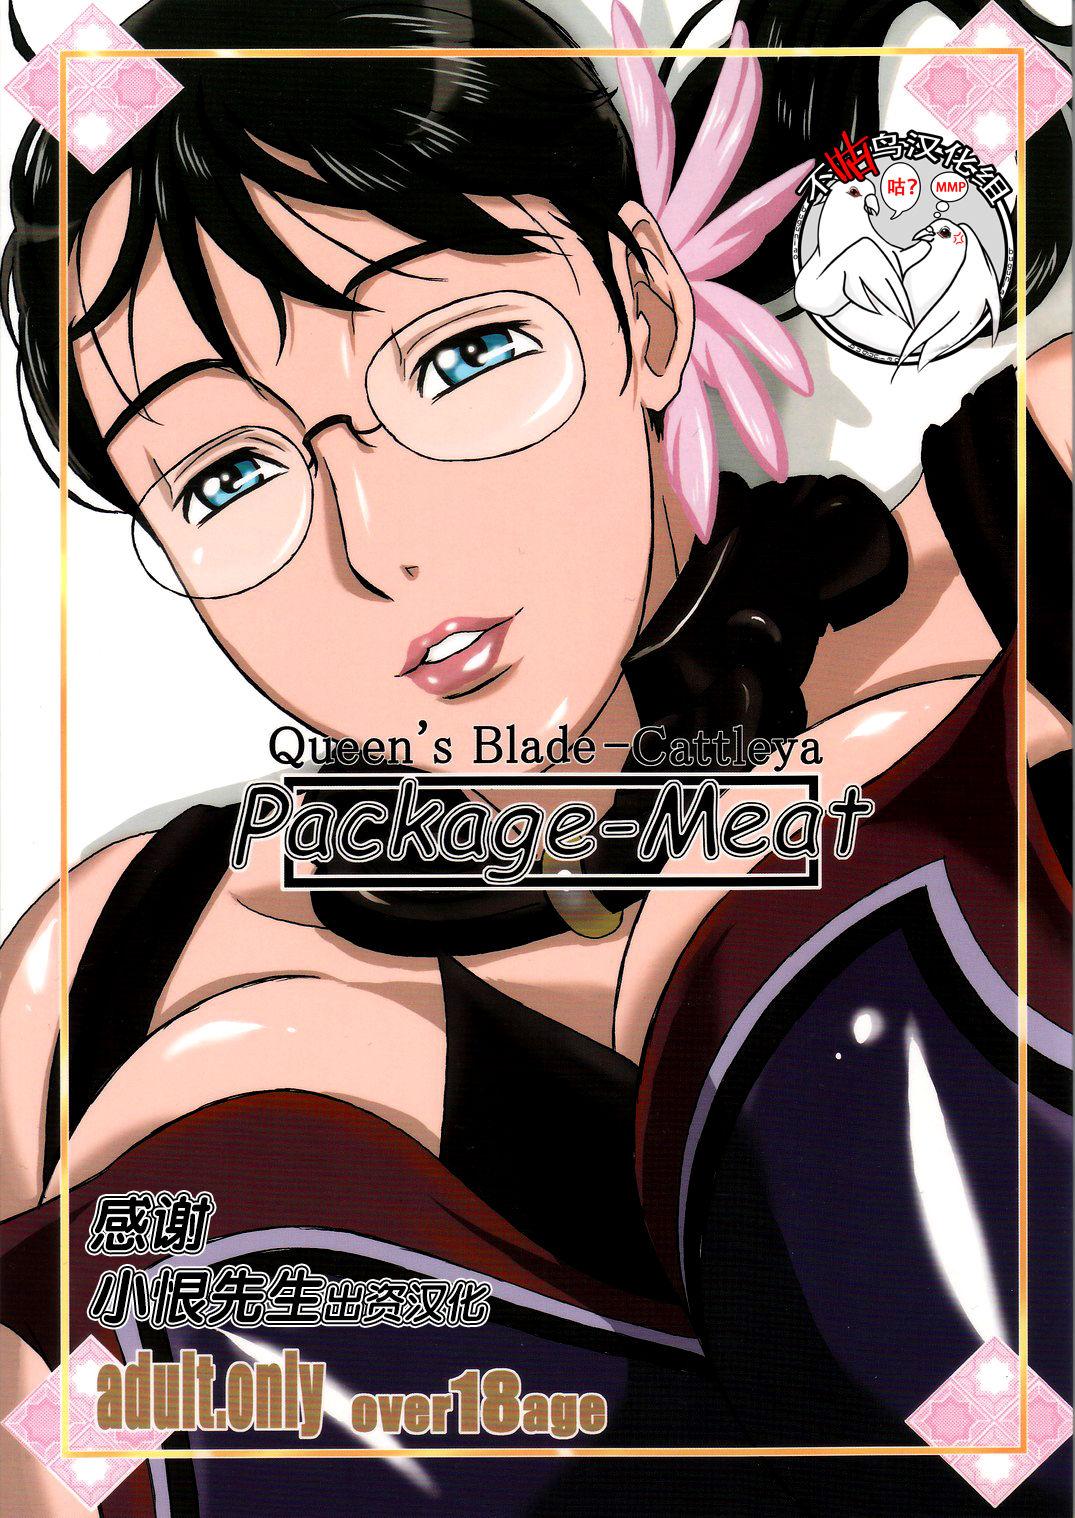 Petite Teenager (C72) [Shiawase Pullin Dou (Ninroku)] Package Meat (Queen's Blade) [Chinese] amateur coloring version - Queens blade Twink - Page 1